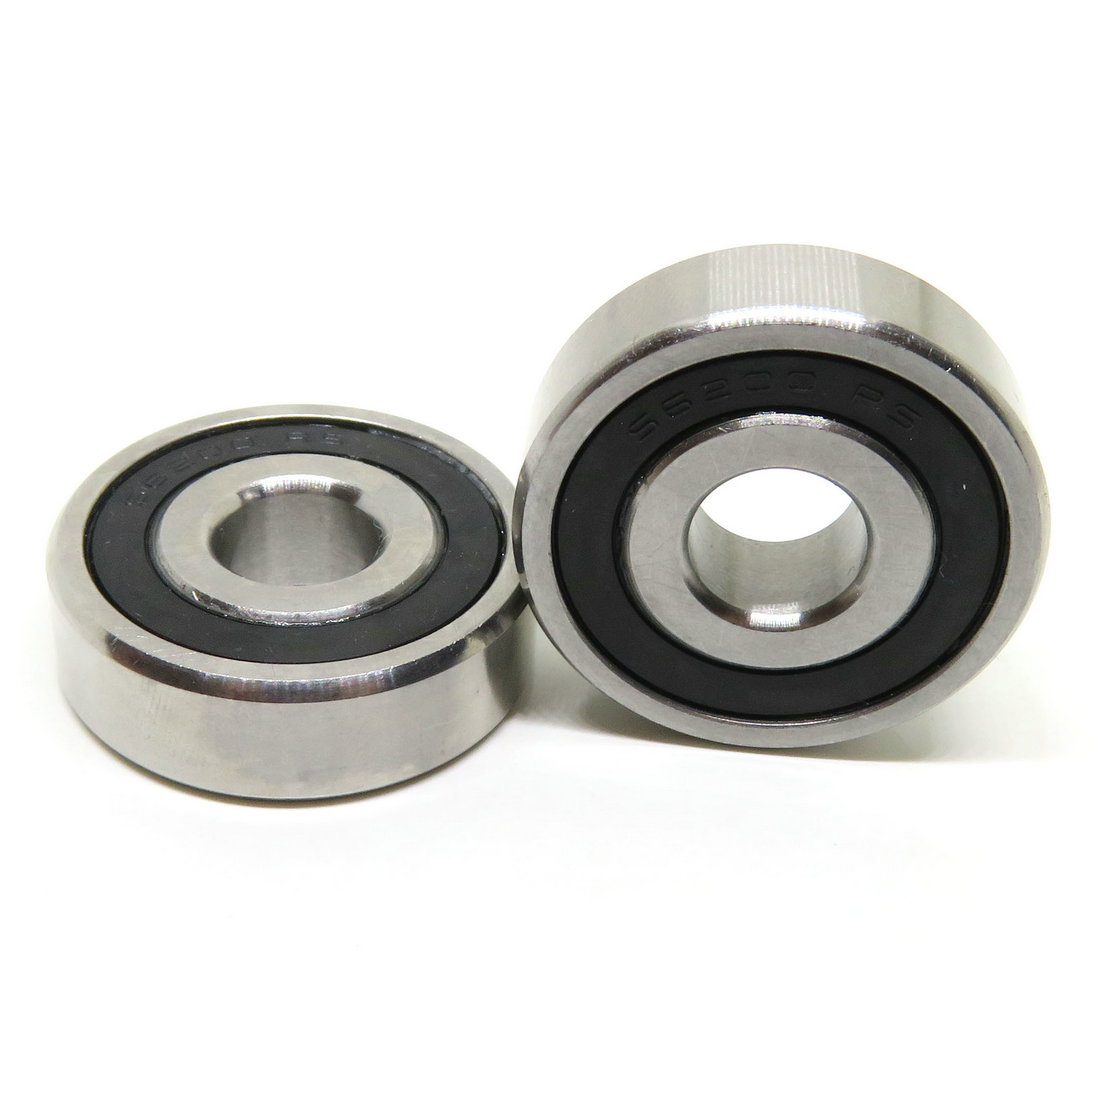 ABEC-3 Rubber Seal S6302RS Bearing 15x42x13mm 440C Stainless Steel S6302-2RS Stainless Steel Ball Bearings.jpg